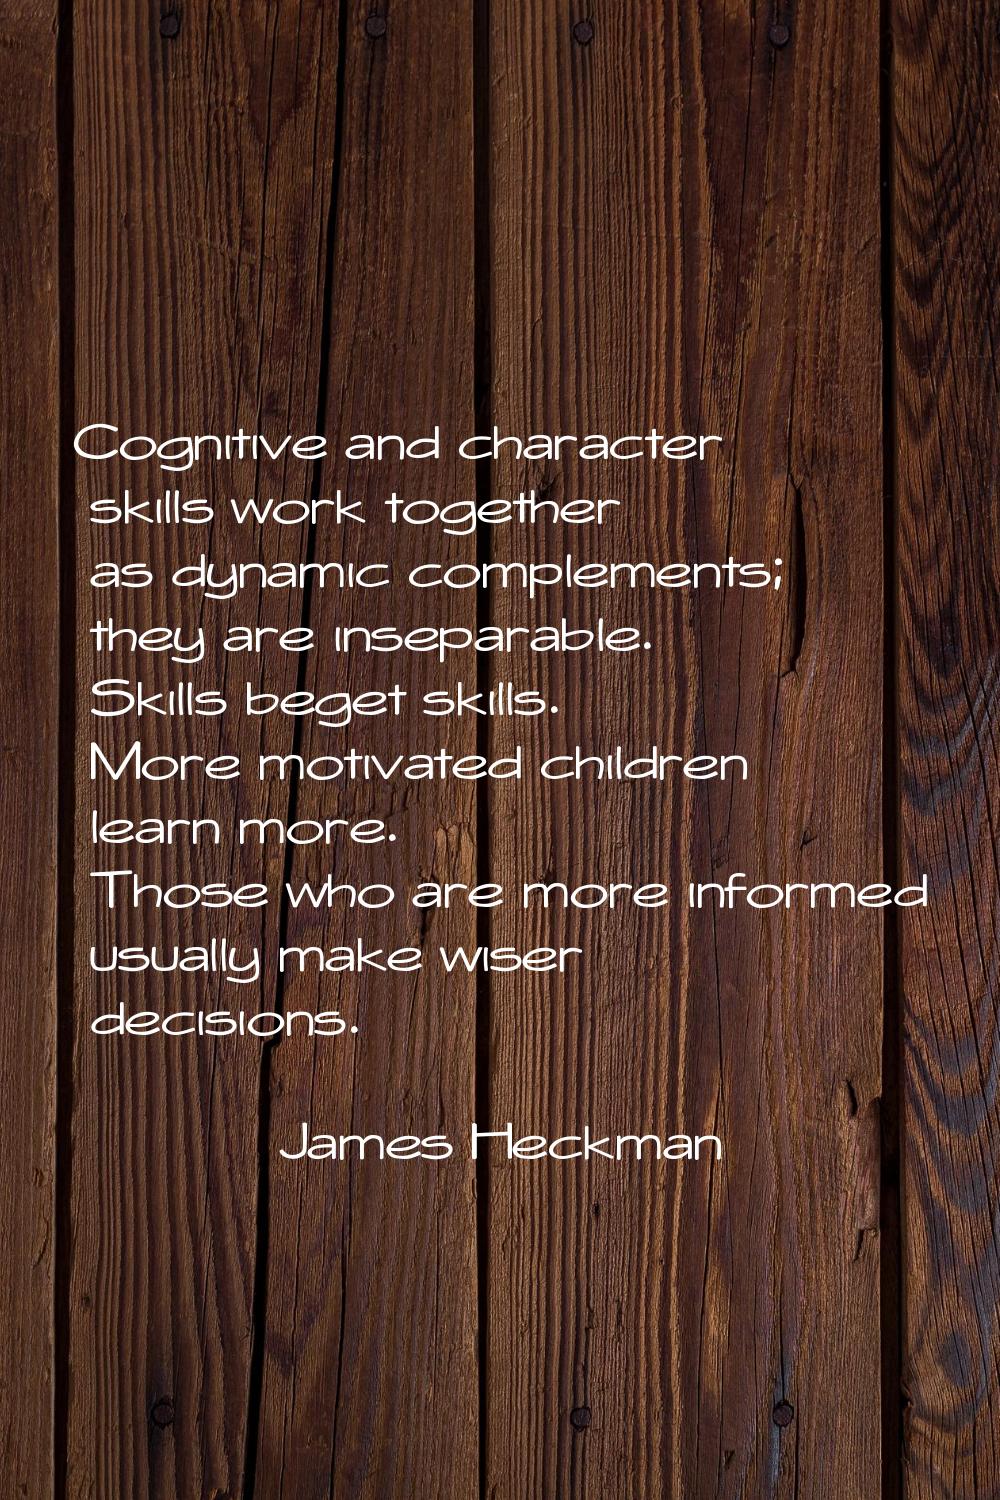 Cognitive and character skills work together as dynamic complements; they are inseparable. Skills b